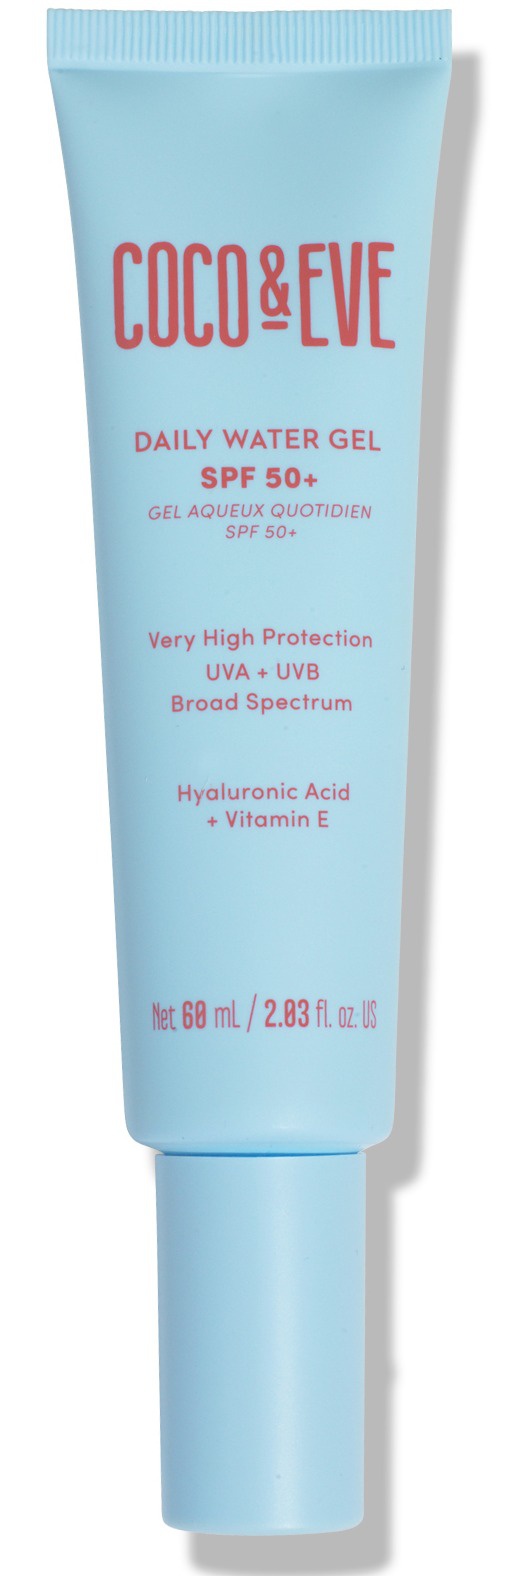 Coco & Eve SPF 50+ Daily Water Gel